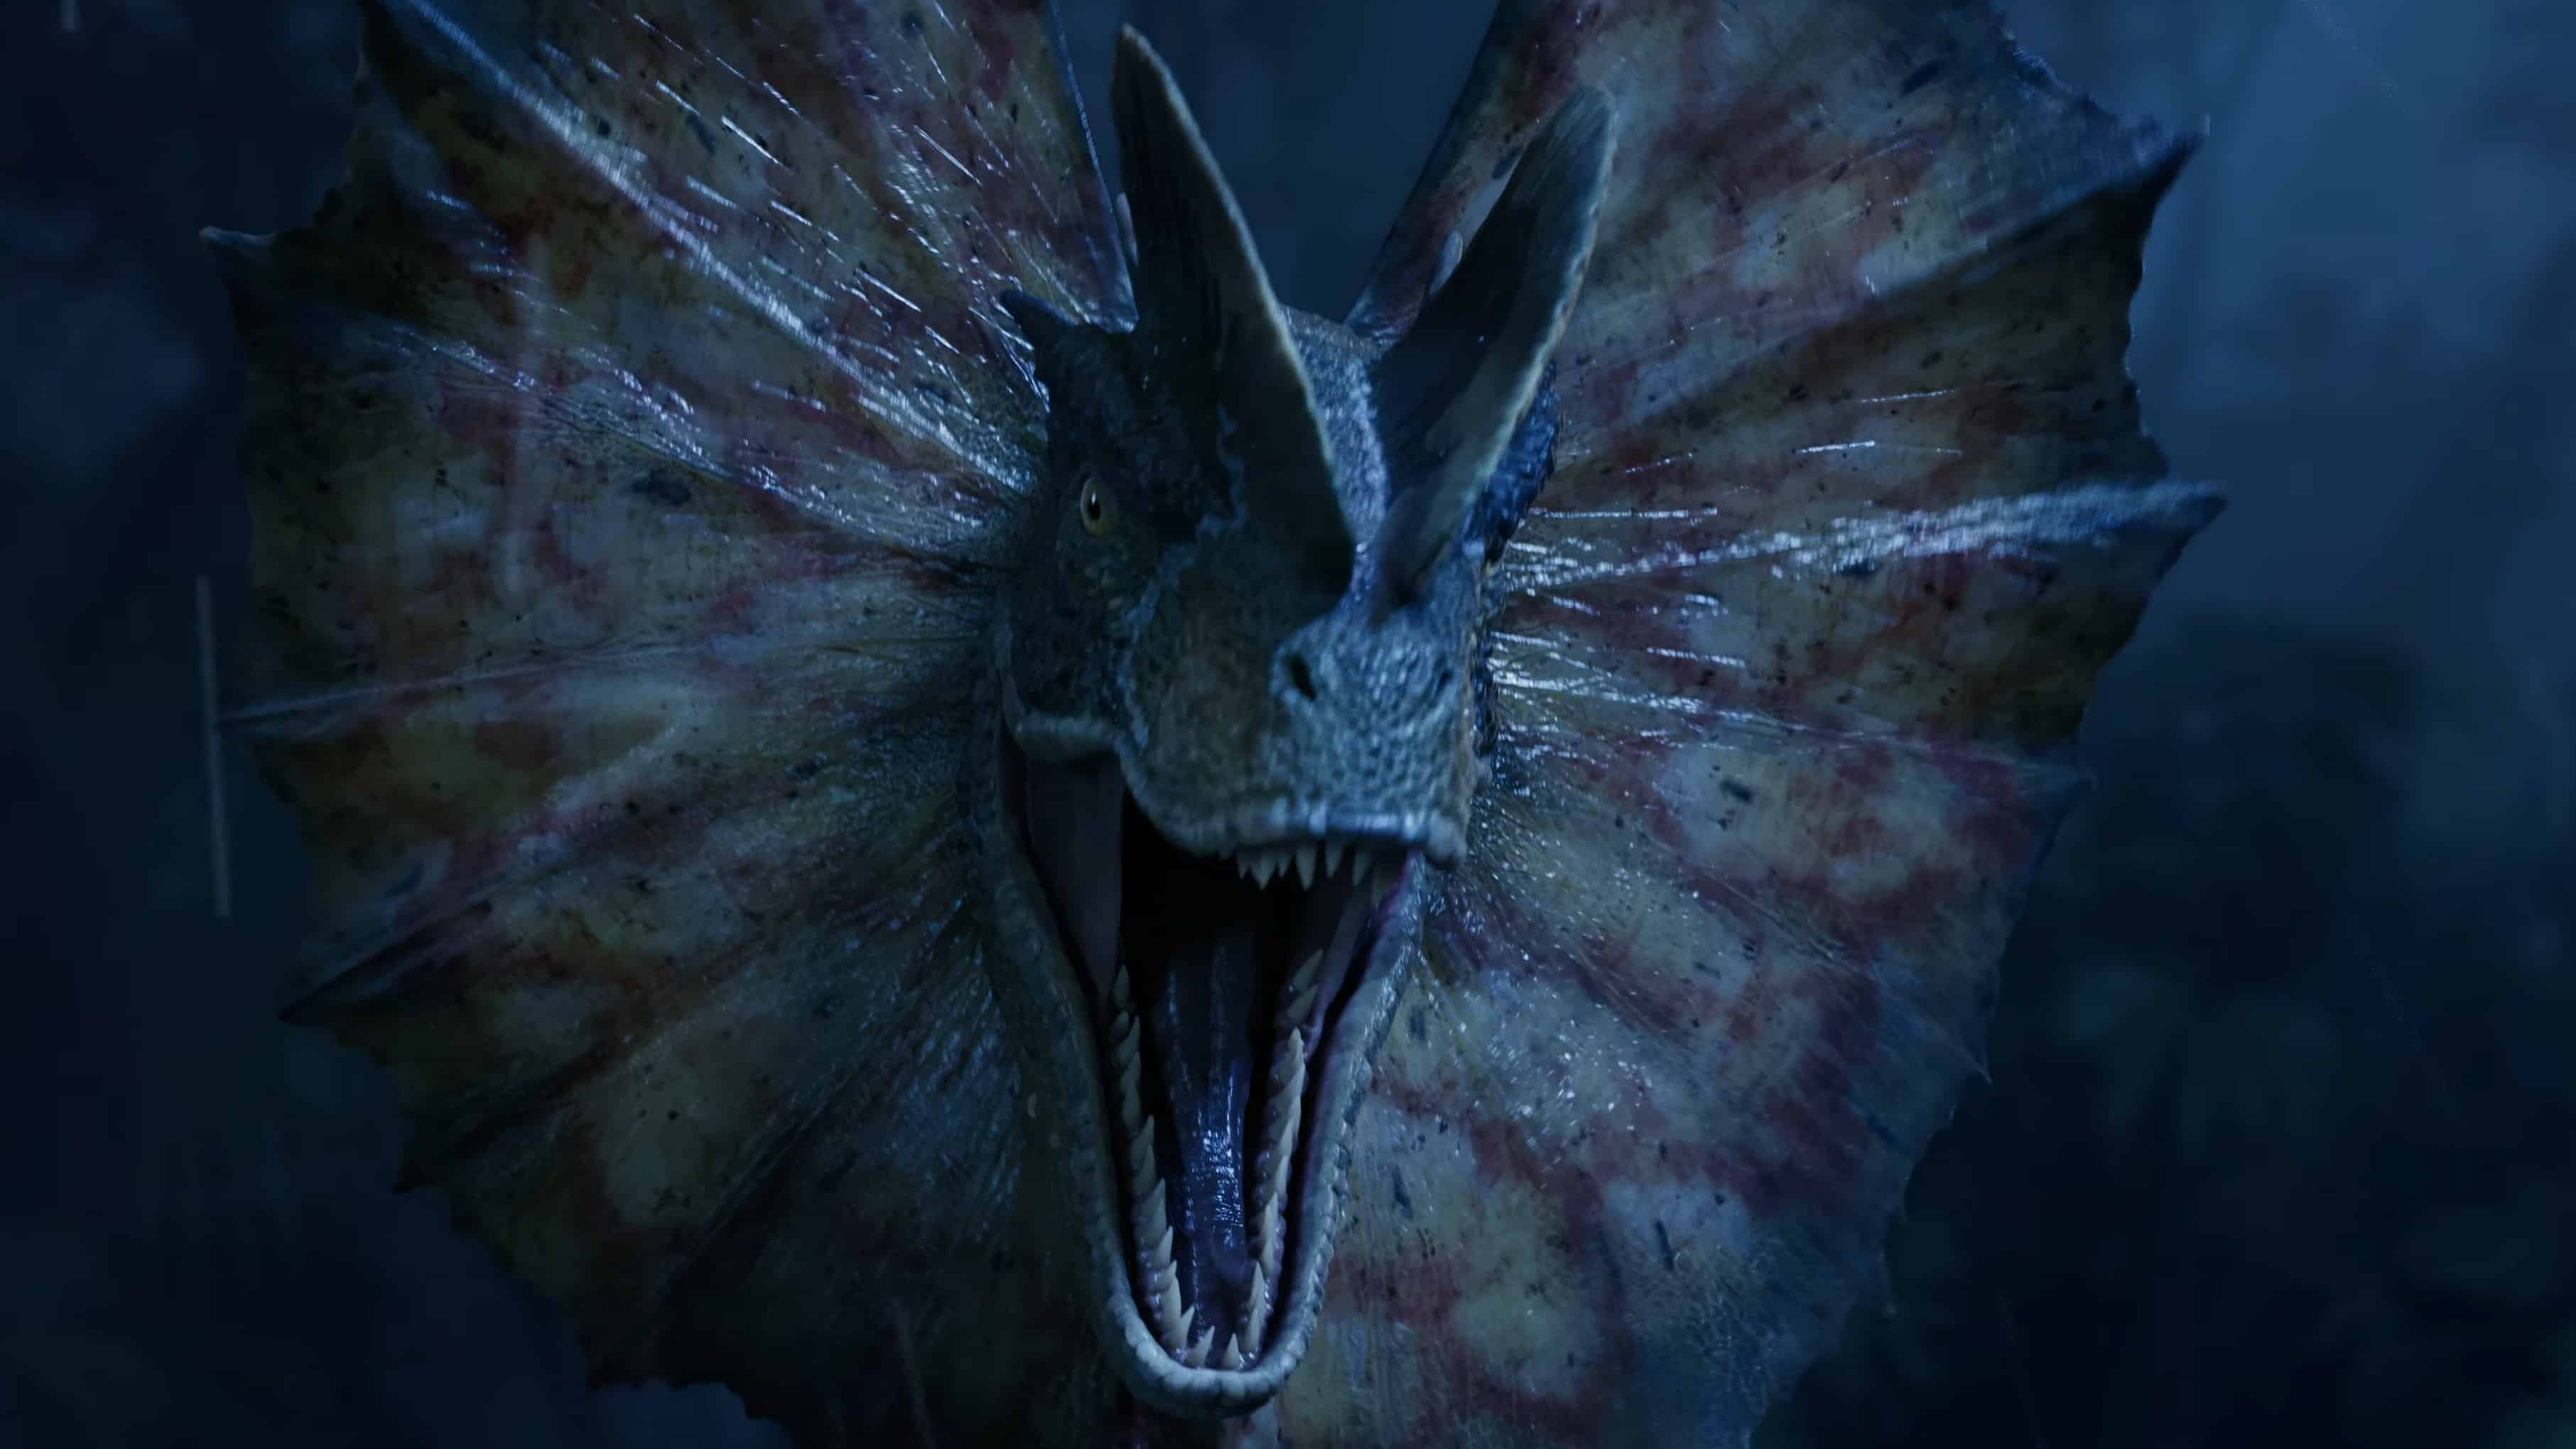 New concept art from Jurassic World reveals a much scarier Indominus Rex